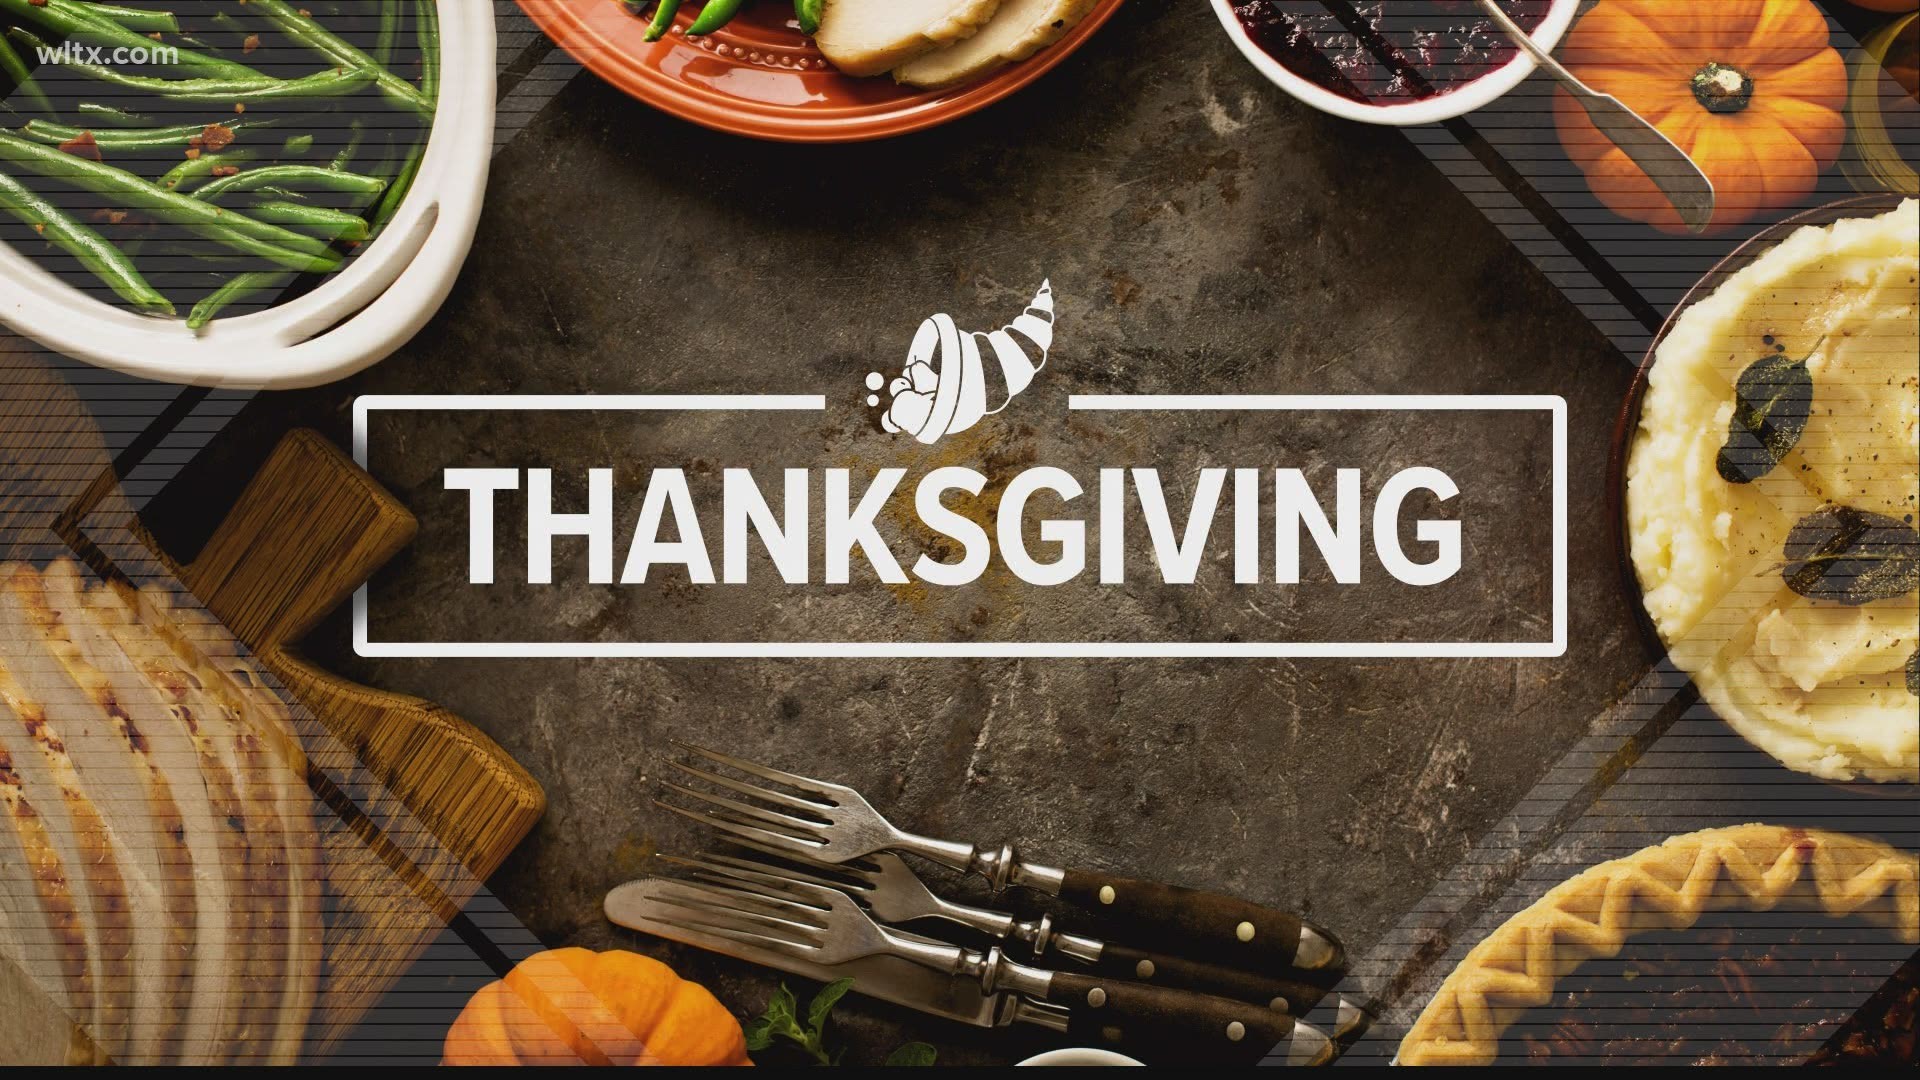 Whether you want to dine out or carry out, we're on your side with options for your Thanksgiving dinner.